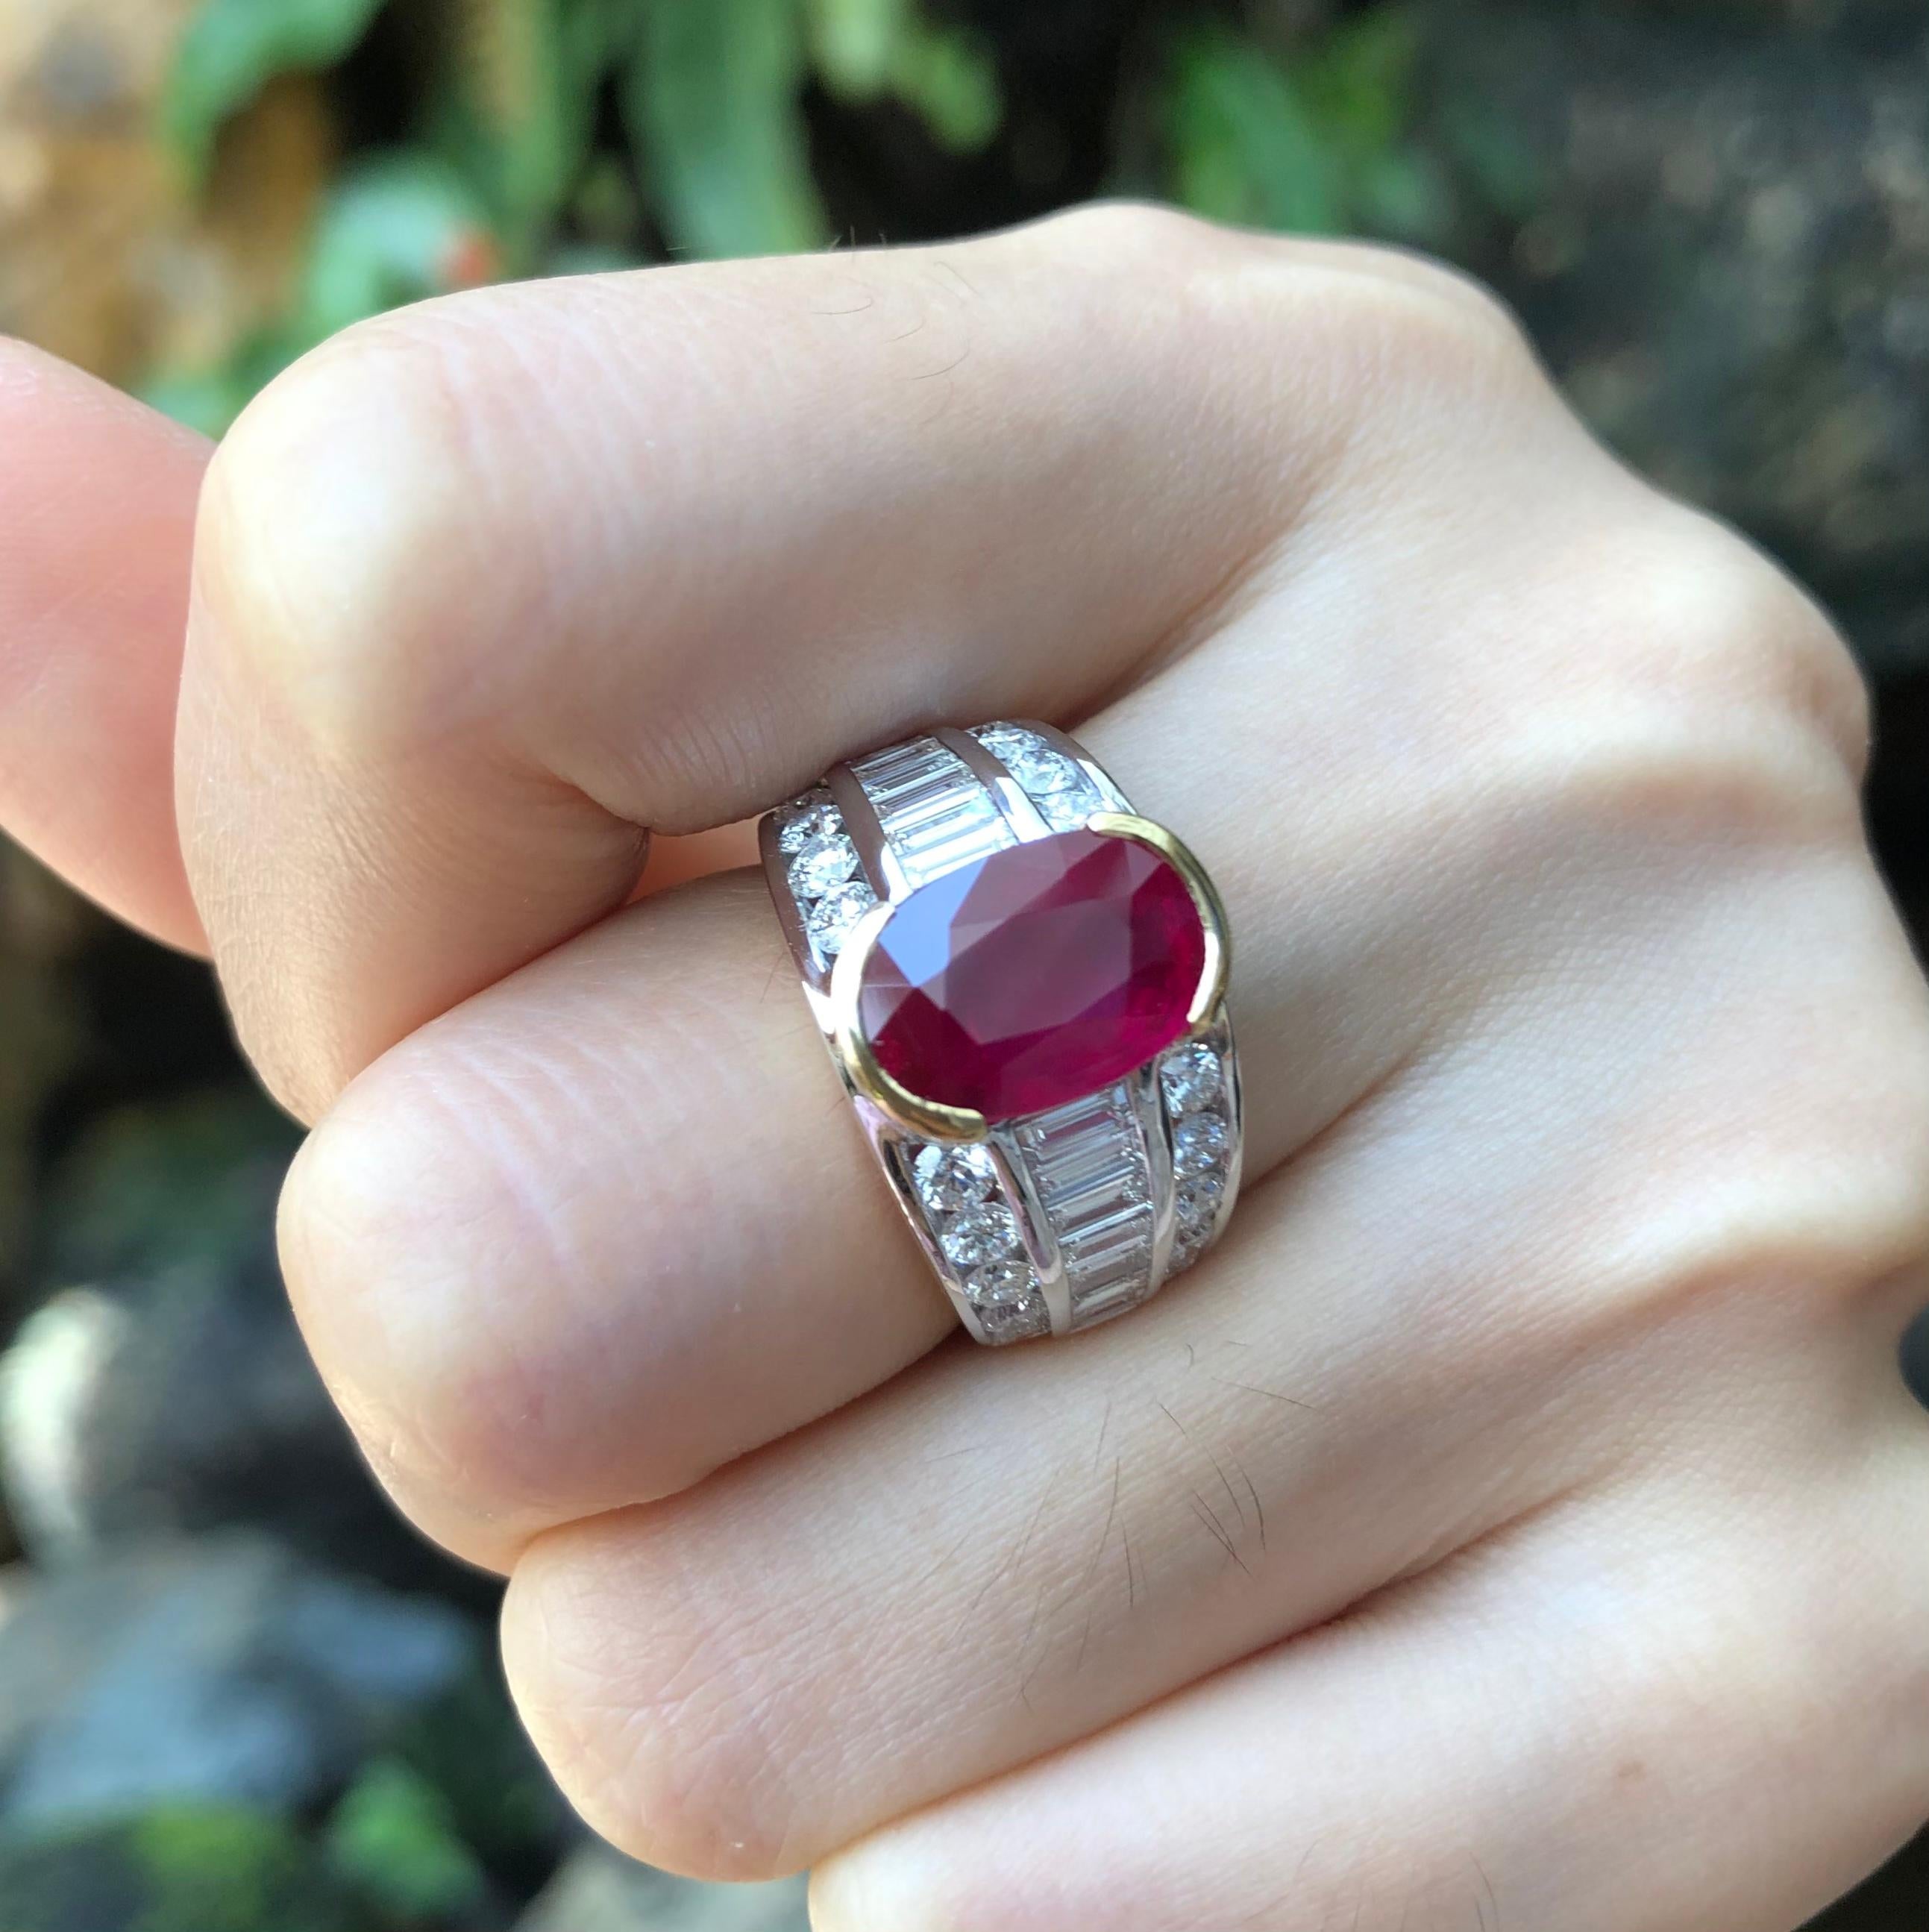 Ruby 4.91 carats with Diamond 2.06 carats Ring set in 18 Karat Gold Settings

Width:  0.8 cm 
Length: 1.3 cm
Ring Size: 54
Total Weight: 11.26 grams

